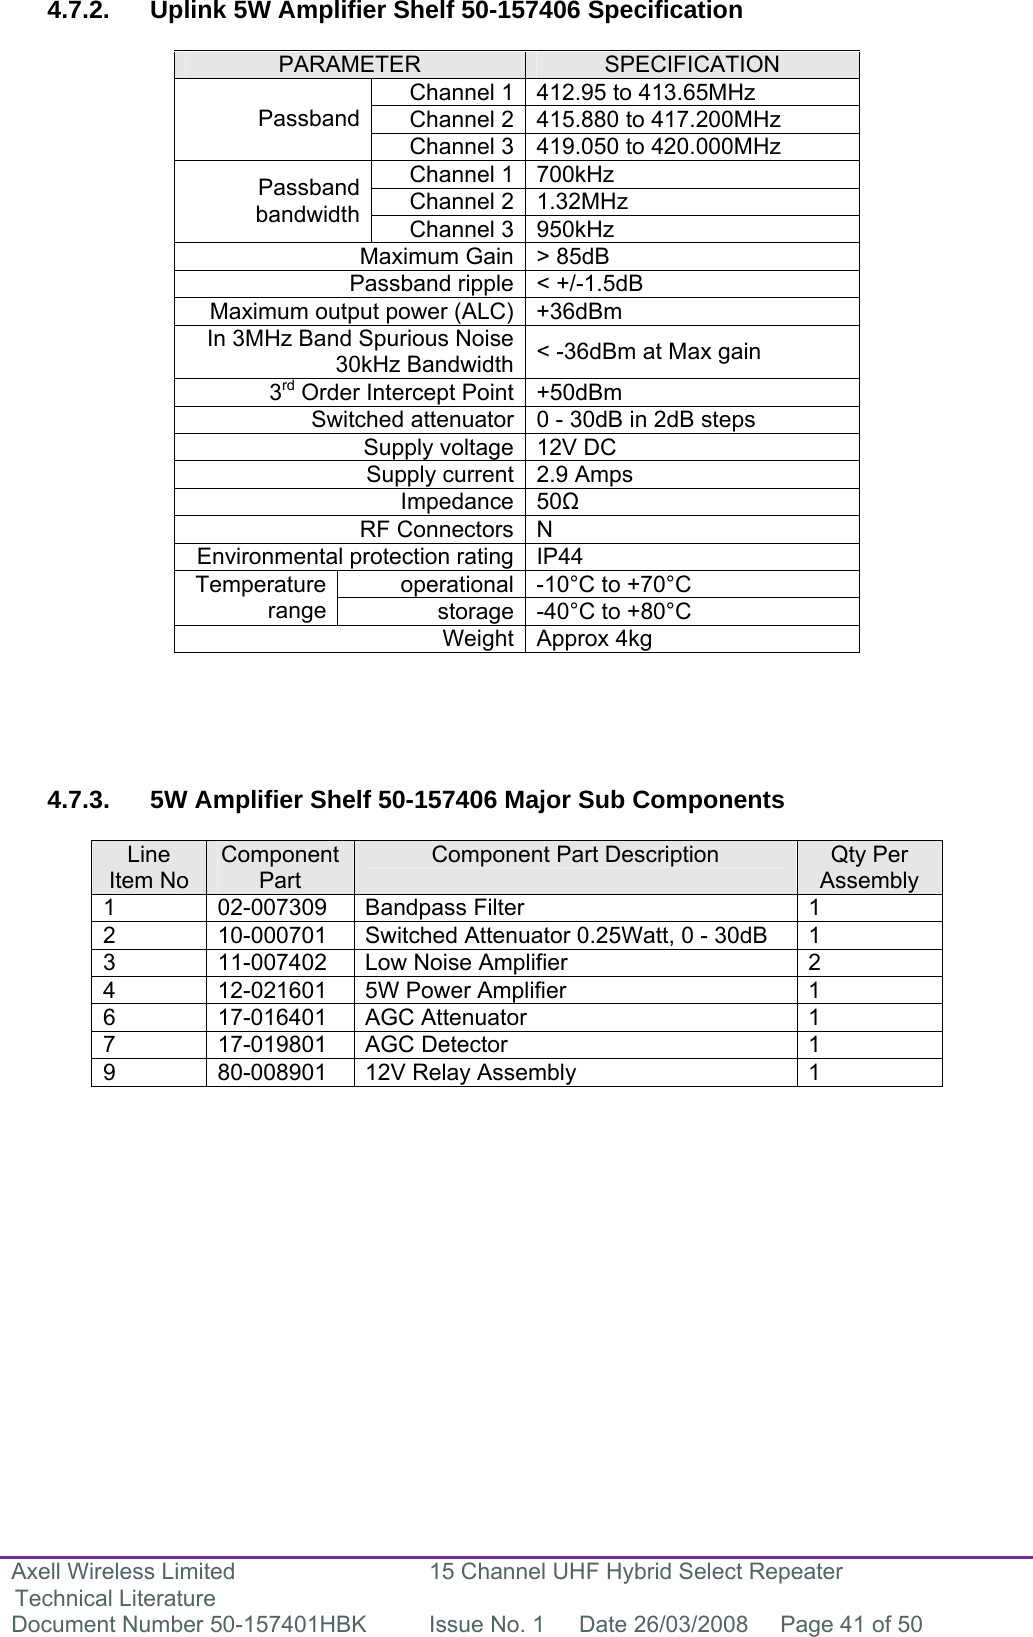 Axell Wireless Limited Technical Literature 15 Channel UHF Hybrid Select Repeater Document Number 50-157401HBK  Issue No. 1  Date 26/03/2008  Page 41 of 50   4.7.2. Uplink 5W Amplifier Shelf 50-157406 Specification  PARAMETER  SPECIFICATION Channel 1 412.95 to 413.65MHz Channel 2 415.880 to 417.200MHz Passband Channel 3 419.050 to 420.000MHz Channel 1 700kHz Channel 2 1.32MHz Passband bandwidth  Channel 3 950kHz Maximum Gain  &gt; 85dB Passband ripple &lt; +/-1.5dB Maximum output power (ALC) +36dBm In 3MHz Band Spurious Noise30kHz Bandwidth  &lt; -36dBm at Max gain 3rd Order Intercept Point +50dBm Switched attenuator 0 - 30dB in 2dB steps Supply voltage 12V DC Supply current 2.9 Amps Impedance 50 RF Connectors N Environmental protection rating IP44 operational -10°C to +70°C Temperature range  storage -40°C to +80°C Weight Approx 4kg      4.7.3.  5W Amplifier Shelf 50-157406 Major Sub Components  Line Item No Component Part Component Part Description  Qty Per Assembly 1 02-007309 Bandpass Filter  1 2  10-000701  Switched Attenuator 0.25Watt, 0 - 30dB  1 3  11-007402  Low Noise Amplifier  2 4  12-021601  5W Power Amplifier  1 6 17-016401 AGC Attenuator  1 7 17-019801 AGC Detector  1 9  80-008901  12V Relay Assembly  1                 